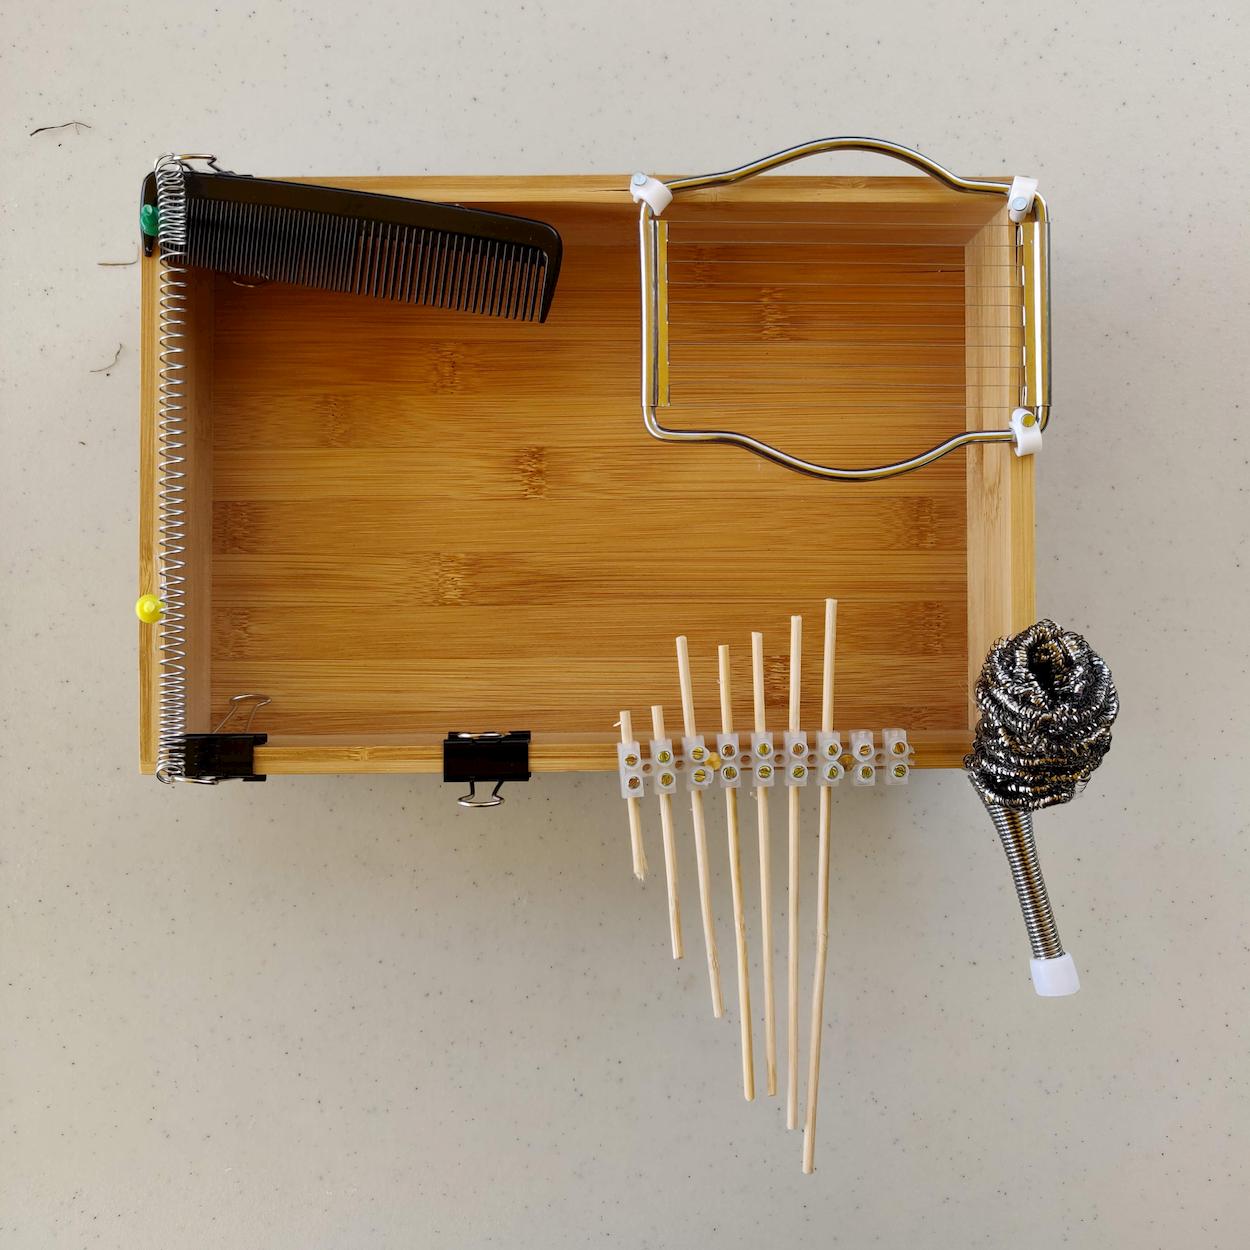 Instrument made by Society of Explorers member